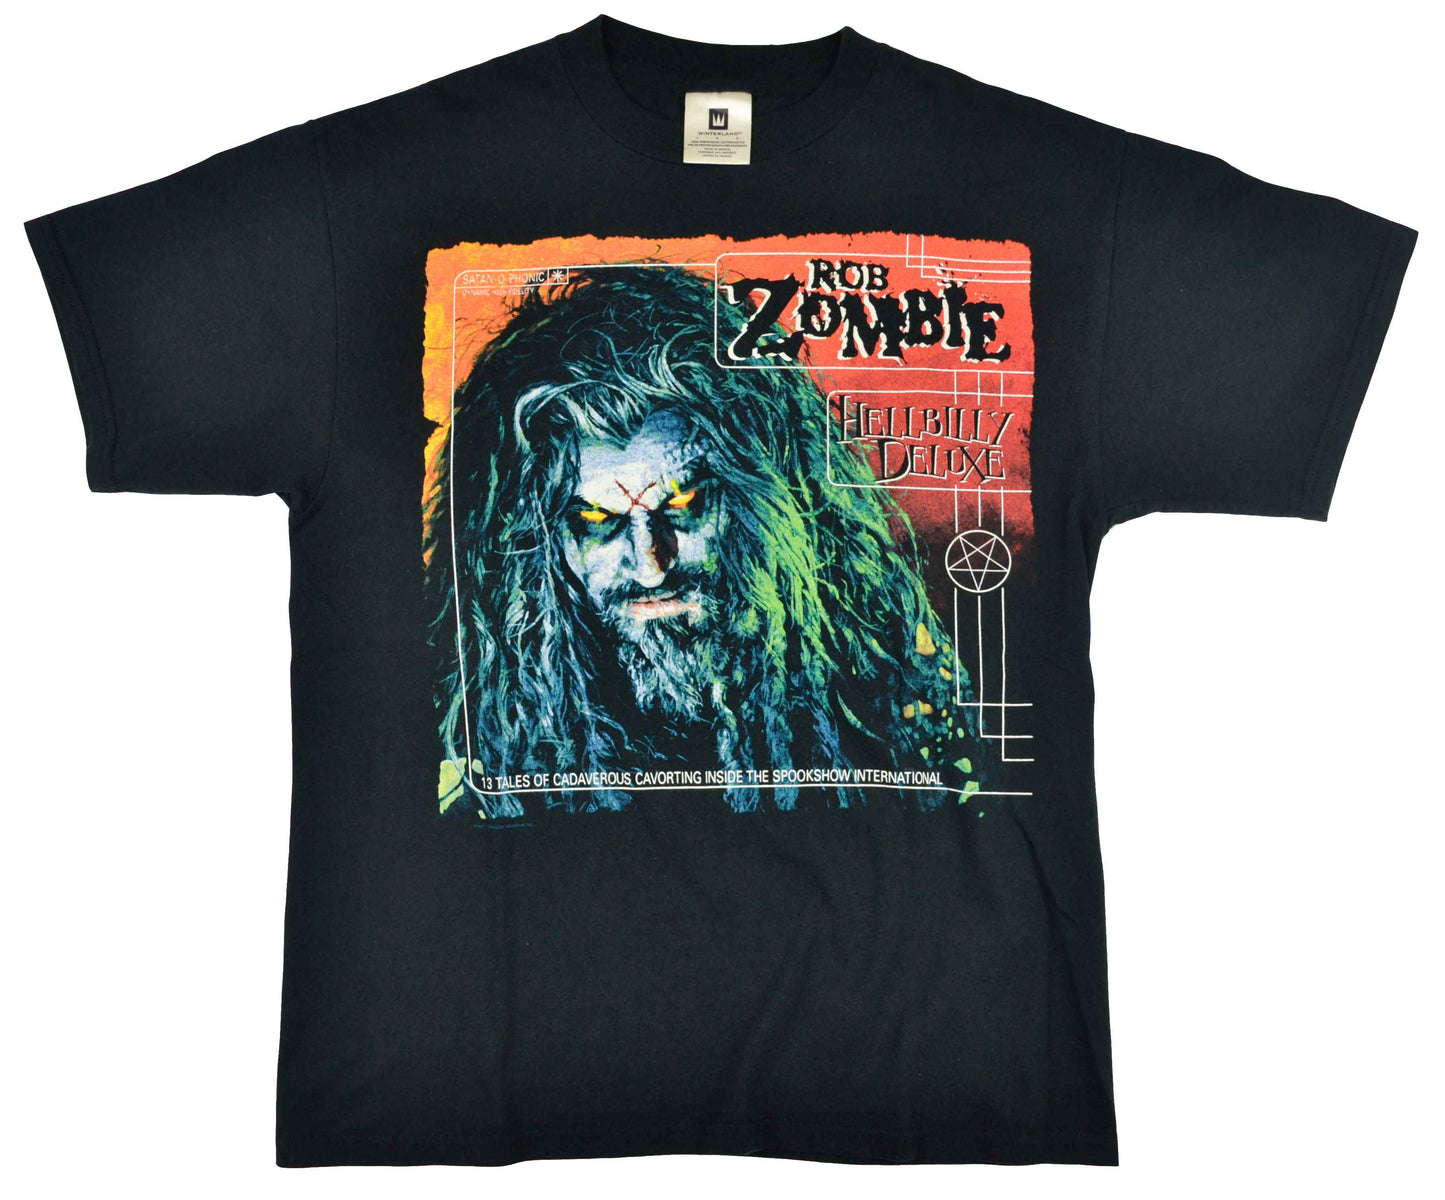 Vintage Rob Zombie 1998 "Hellbilly Deluxe" Band Shirt  "Great things come out of being hungry and cold. Once you're pampered, you get lazy". This shirt comes from his first solo album "Hellbilly Studio". Zombie's music has been described as "melding metal with industrial, hypnotic rhythms and haunting sounds". ﻿A fun fact is that Rob is vegan. The tee has a cool vintage look.